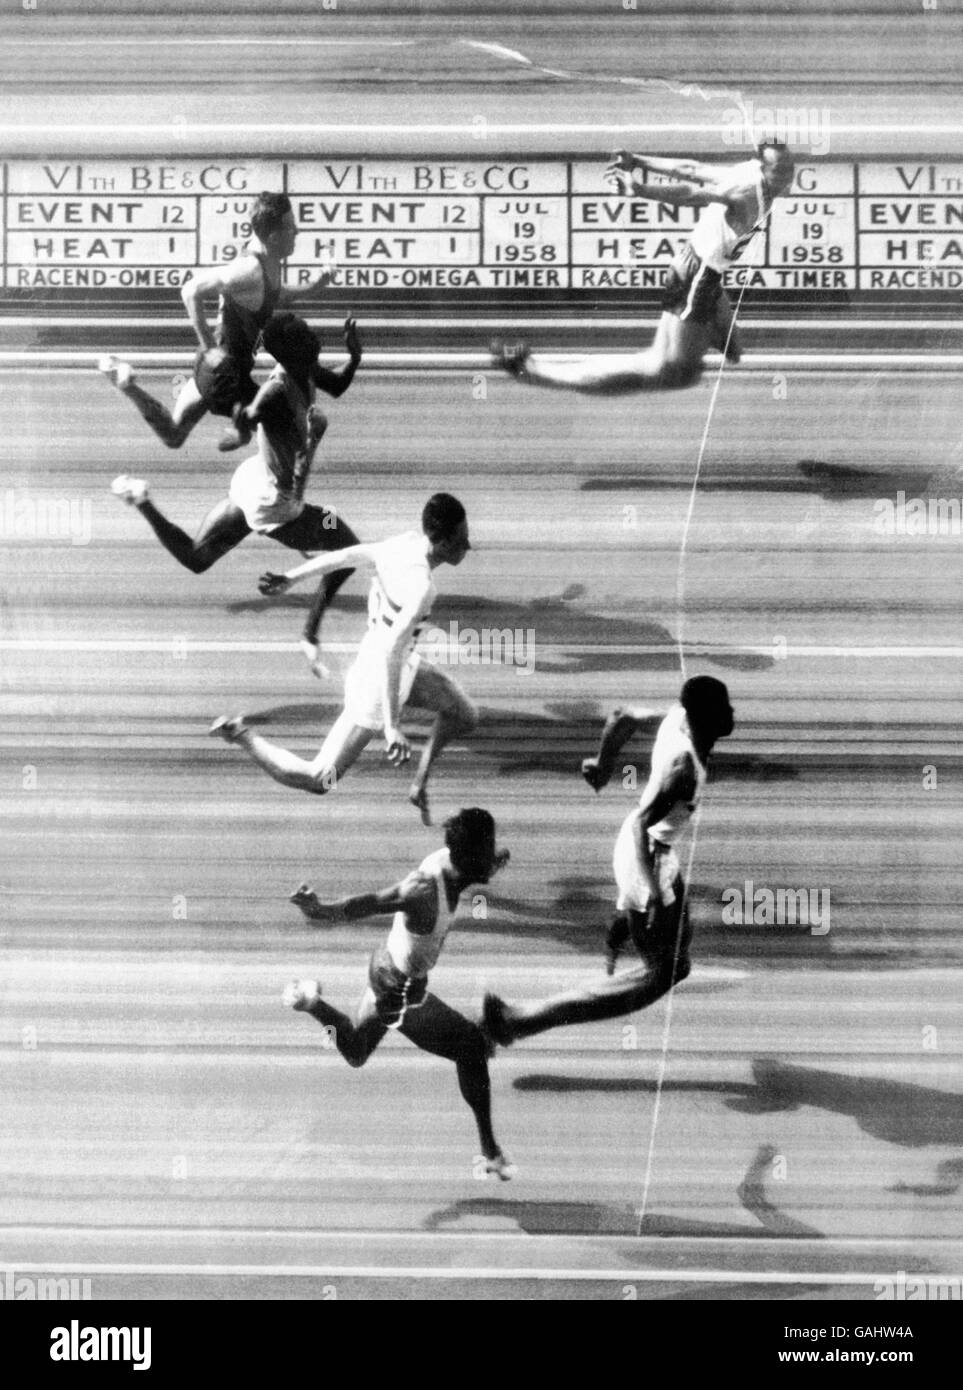 Athletics - 6th British Empire and Commonwealth Games - Men's 100yds Final - Cardiff. Jamaica's K Gardiner (top) wins gold from Bahamas' Thomas Robinson (second from bottom) Stock Photo